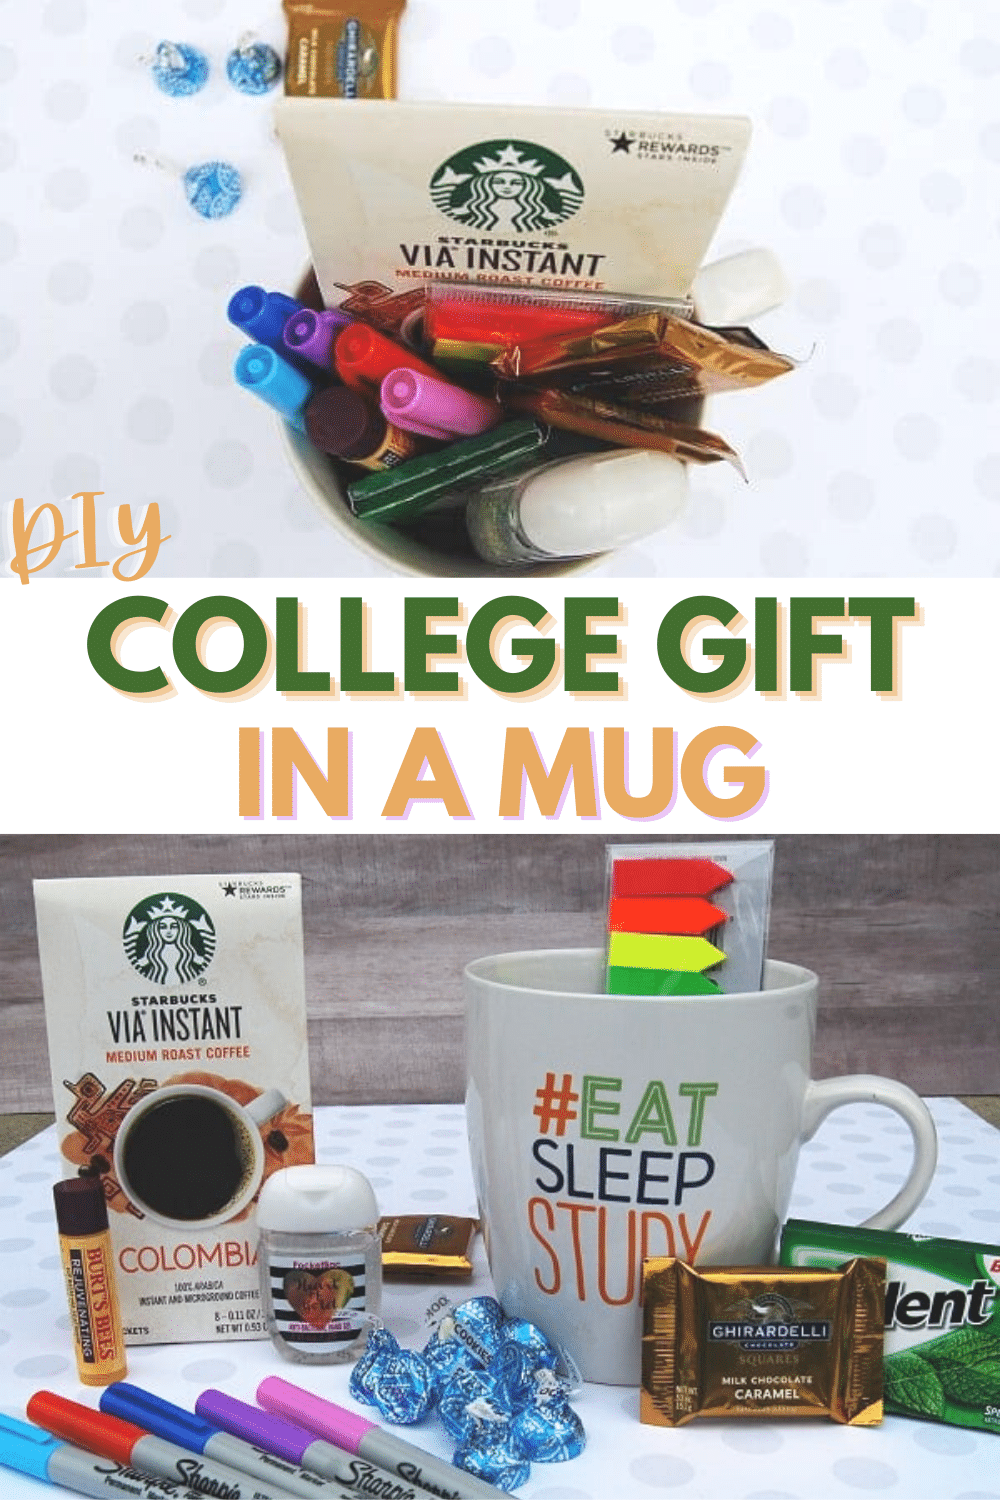 This college gift in a mug is a fun and easy gift idea for any college student. Perfect for encouragement during finals week or any time as a simple treat. #college #collegegift #giftidea #collegestudent via @wondermomwannab